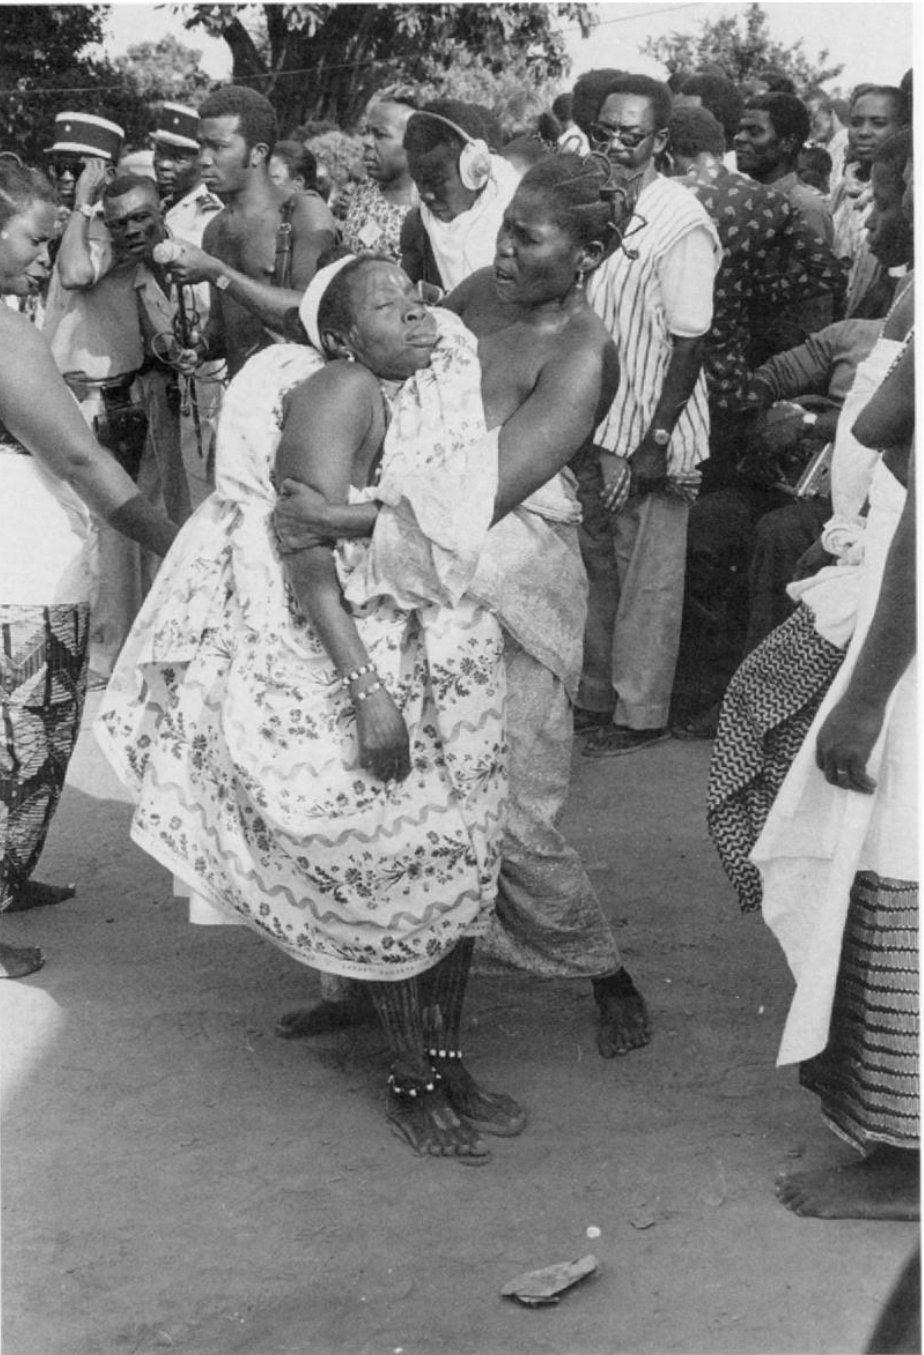   A Mami Wata medium going into trance loses consciousness and is caught by an assistant. Togo, Mina, 1975. Photo by Henry J. Drewal  